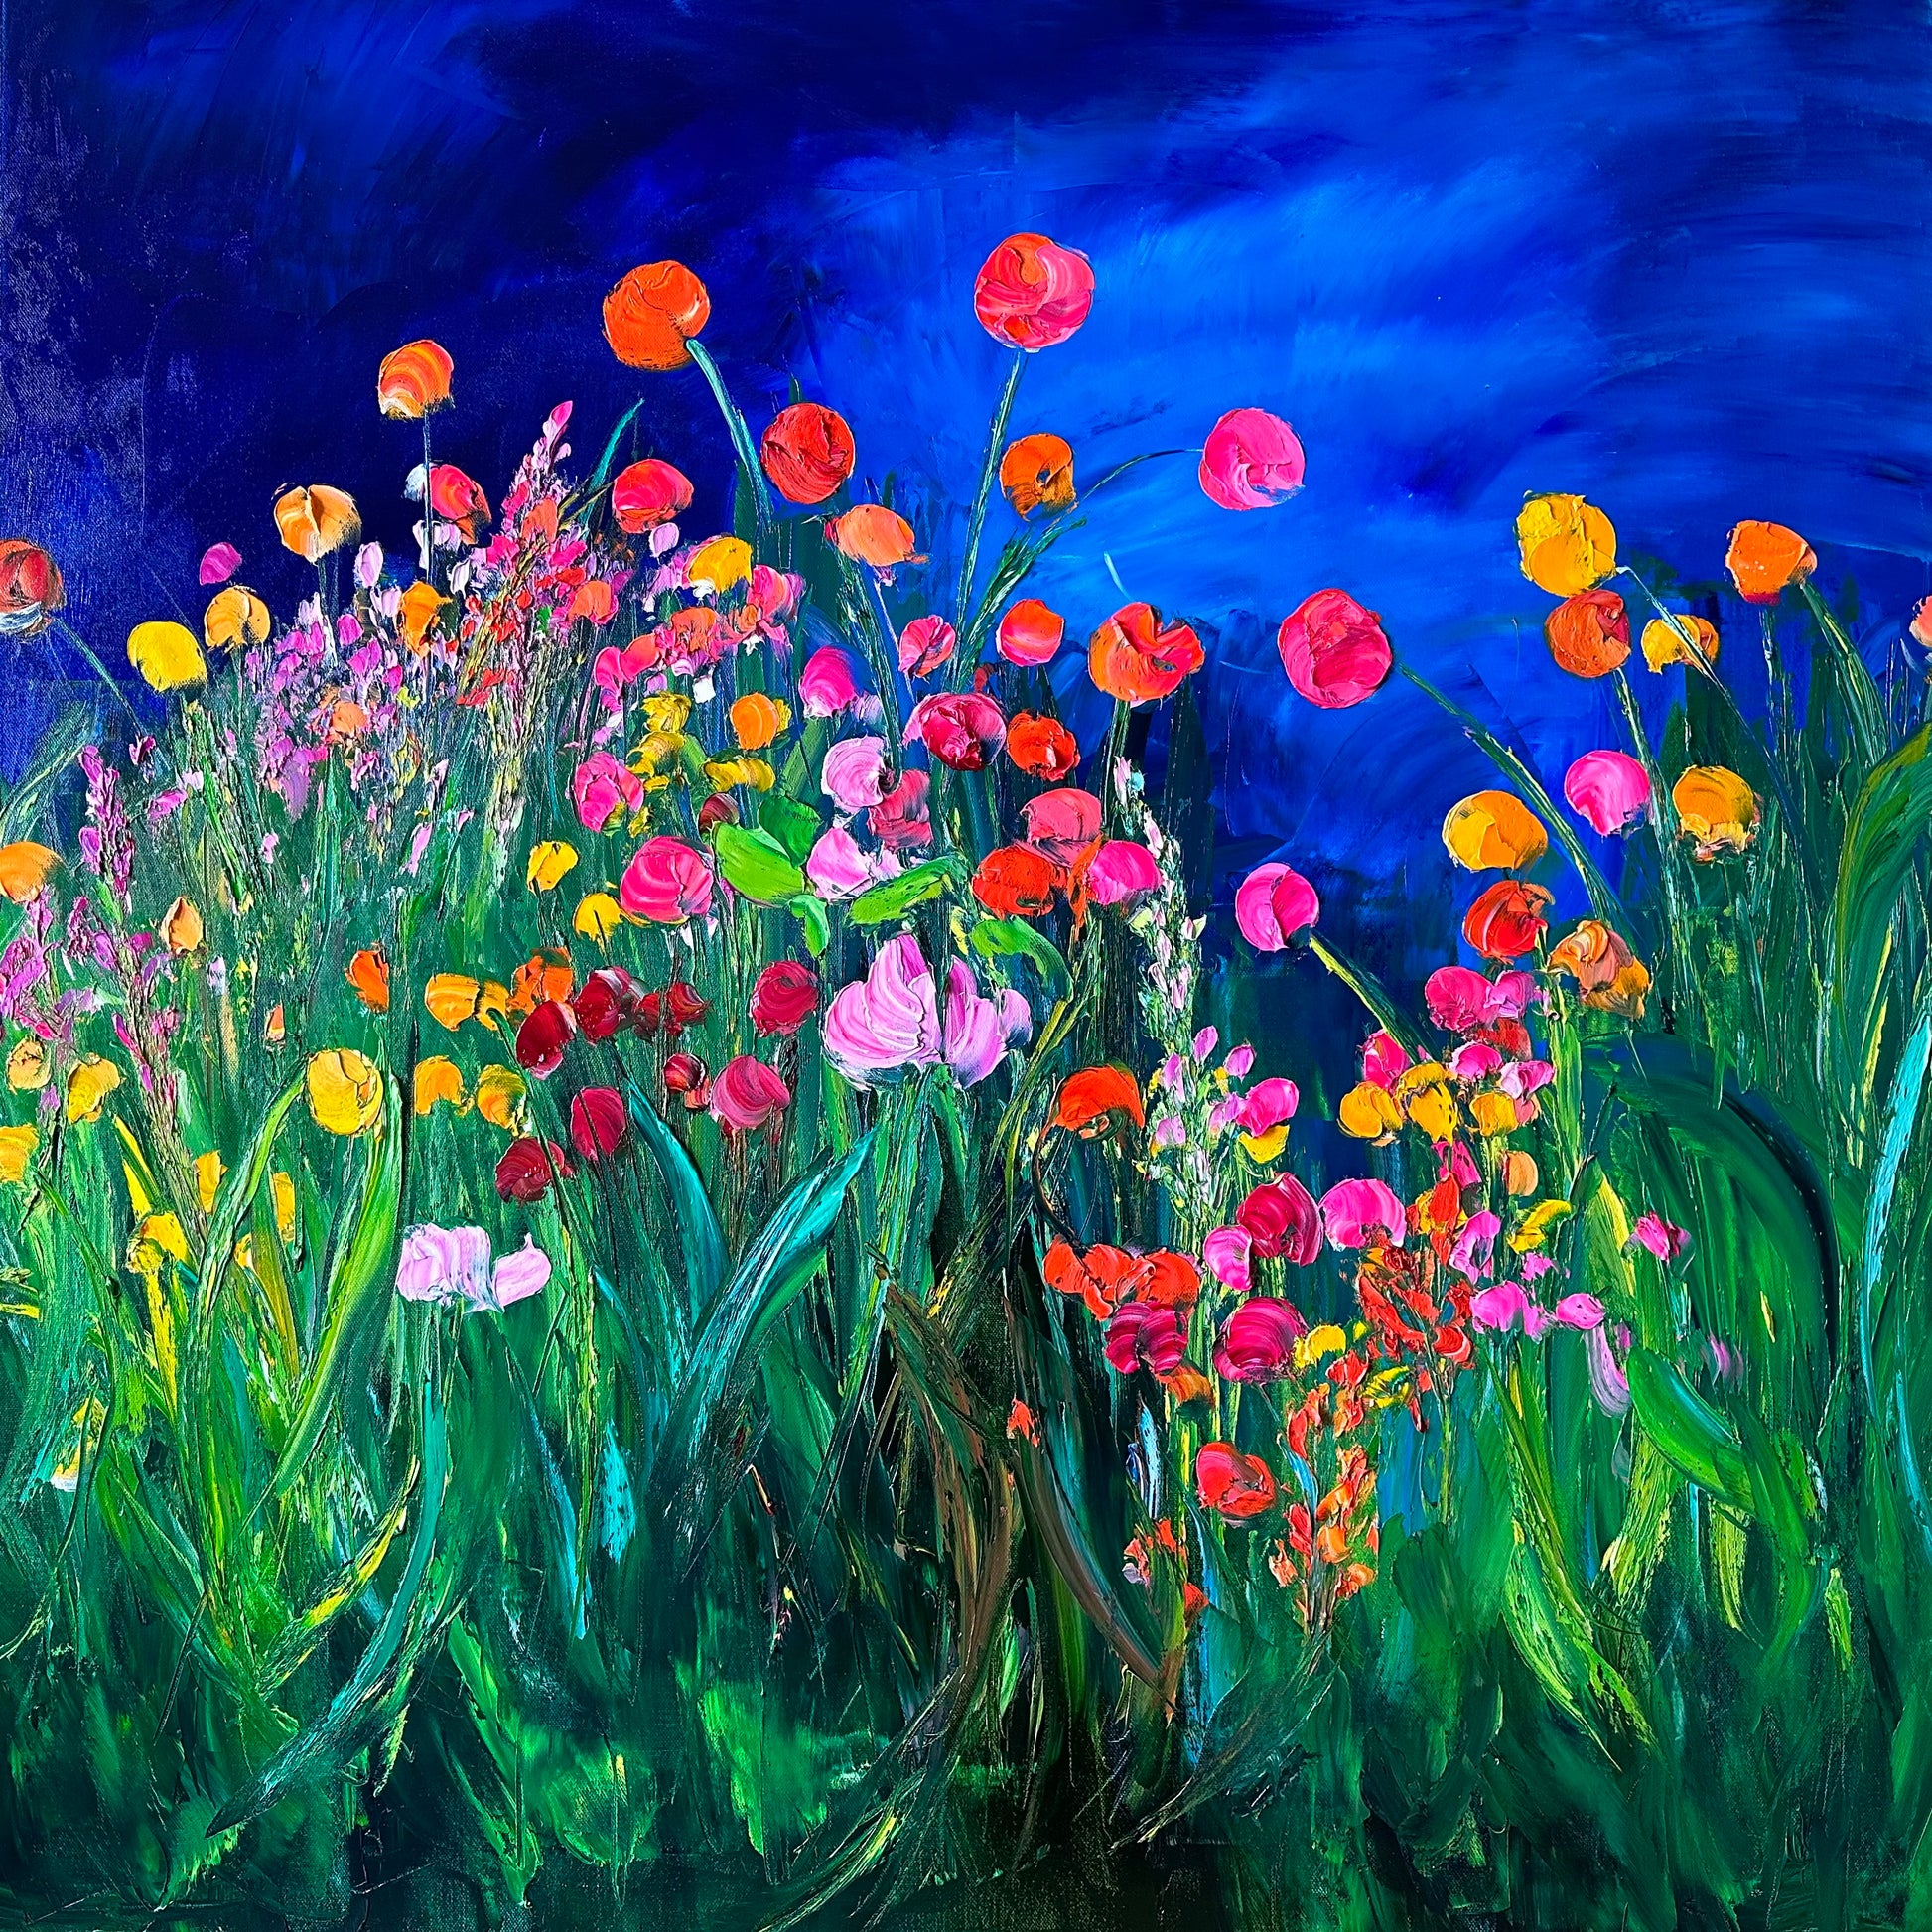 Oil painting of a flower field.